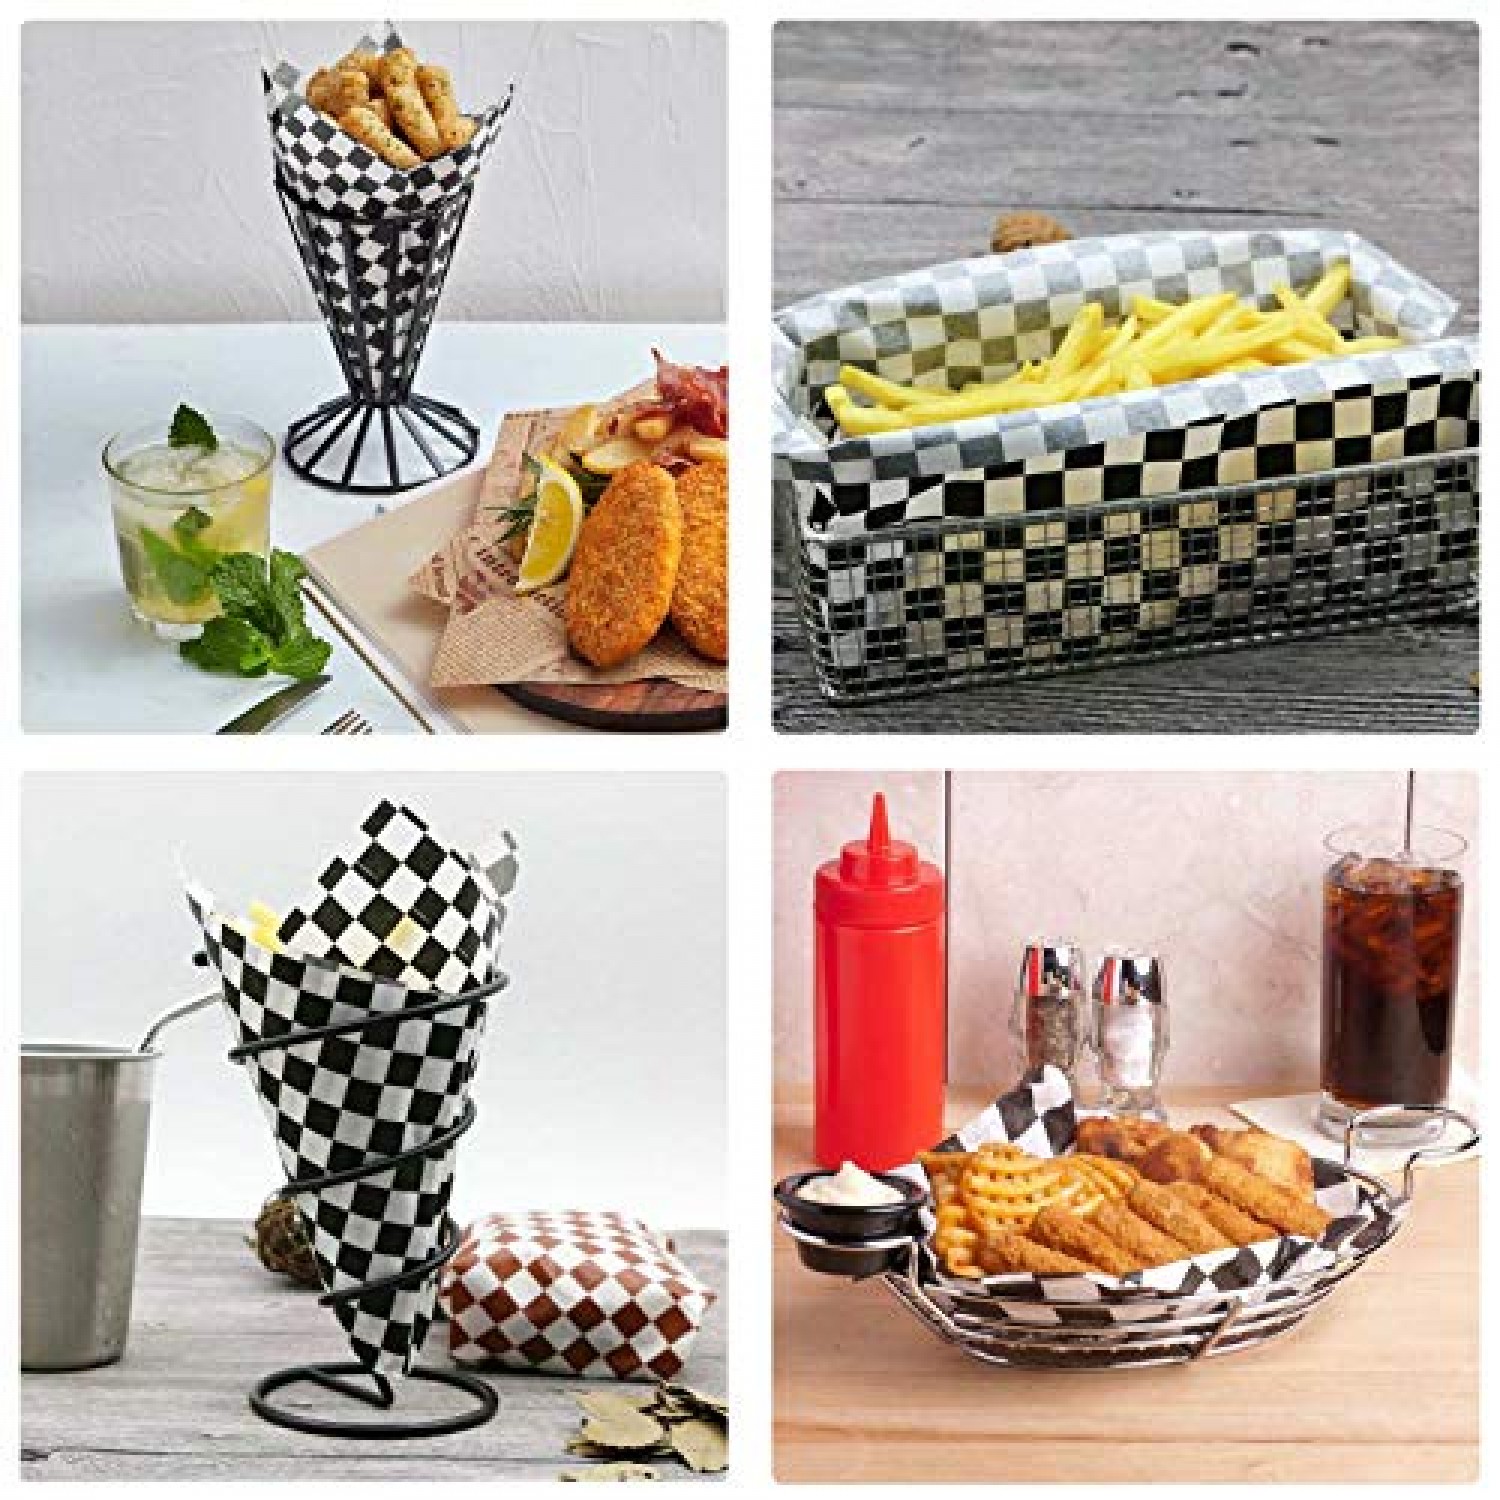 200 Pcs Dry Waxed Deli Paper Liners Food Basket Grease Resistant